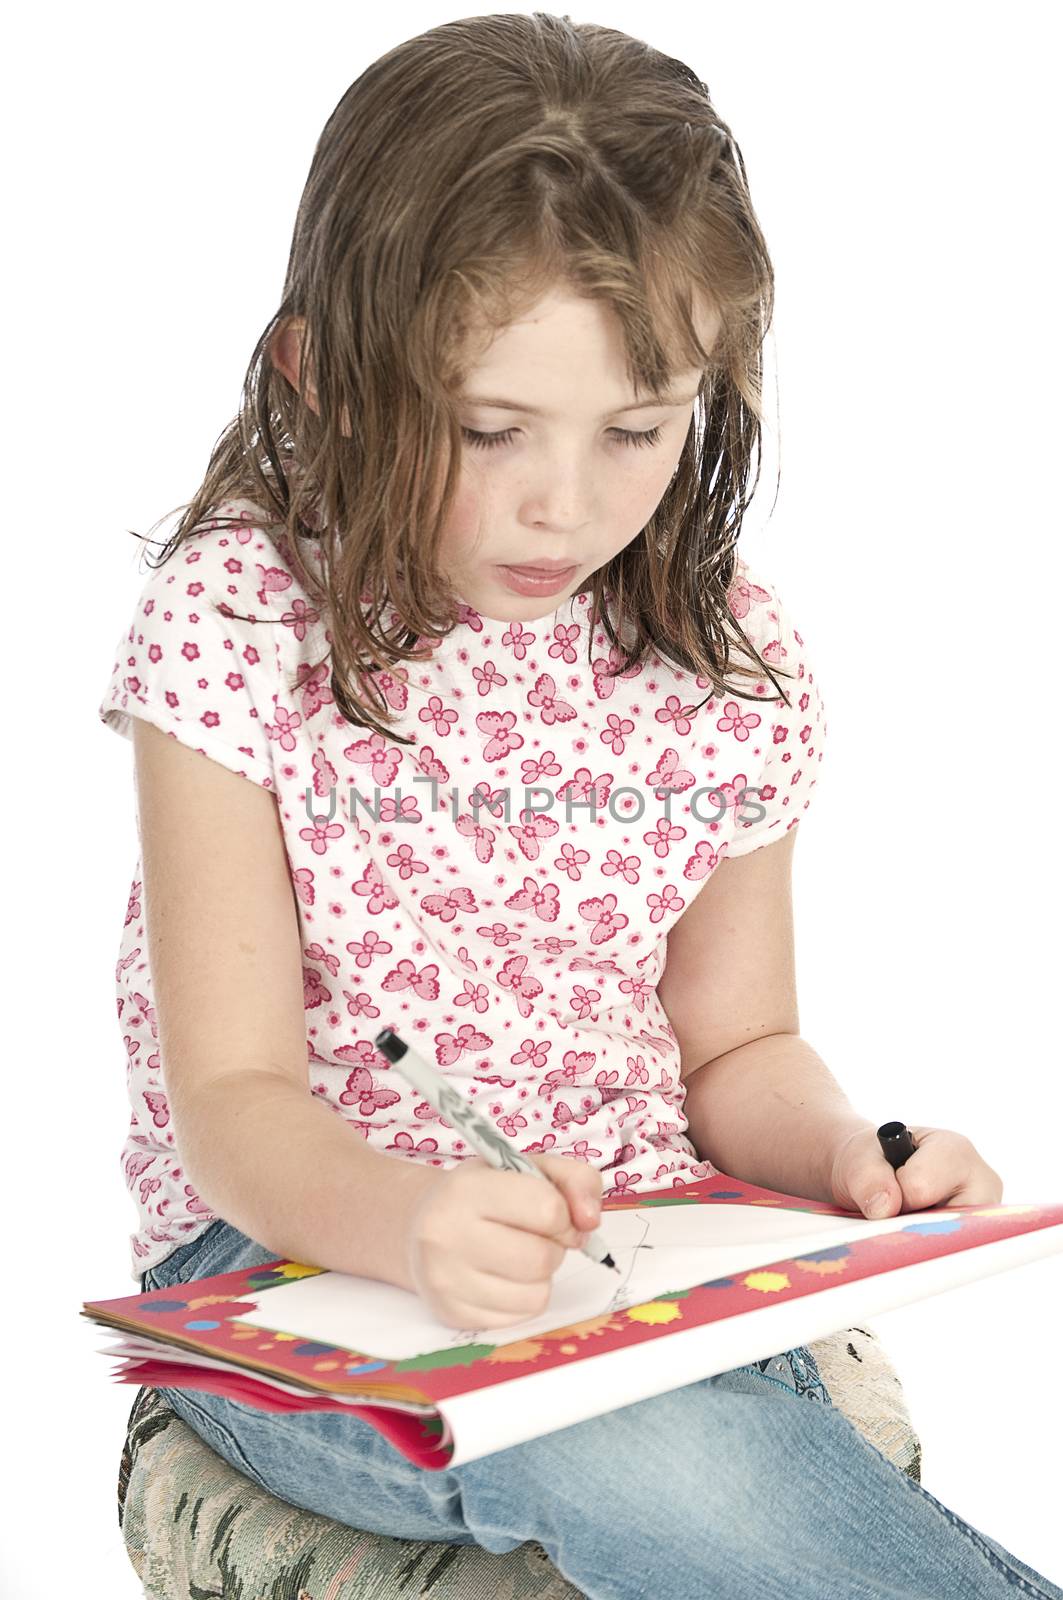 Little girl drawing on a sketchpad.